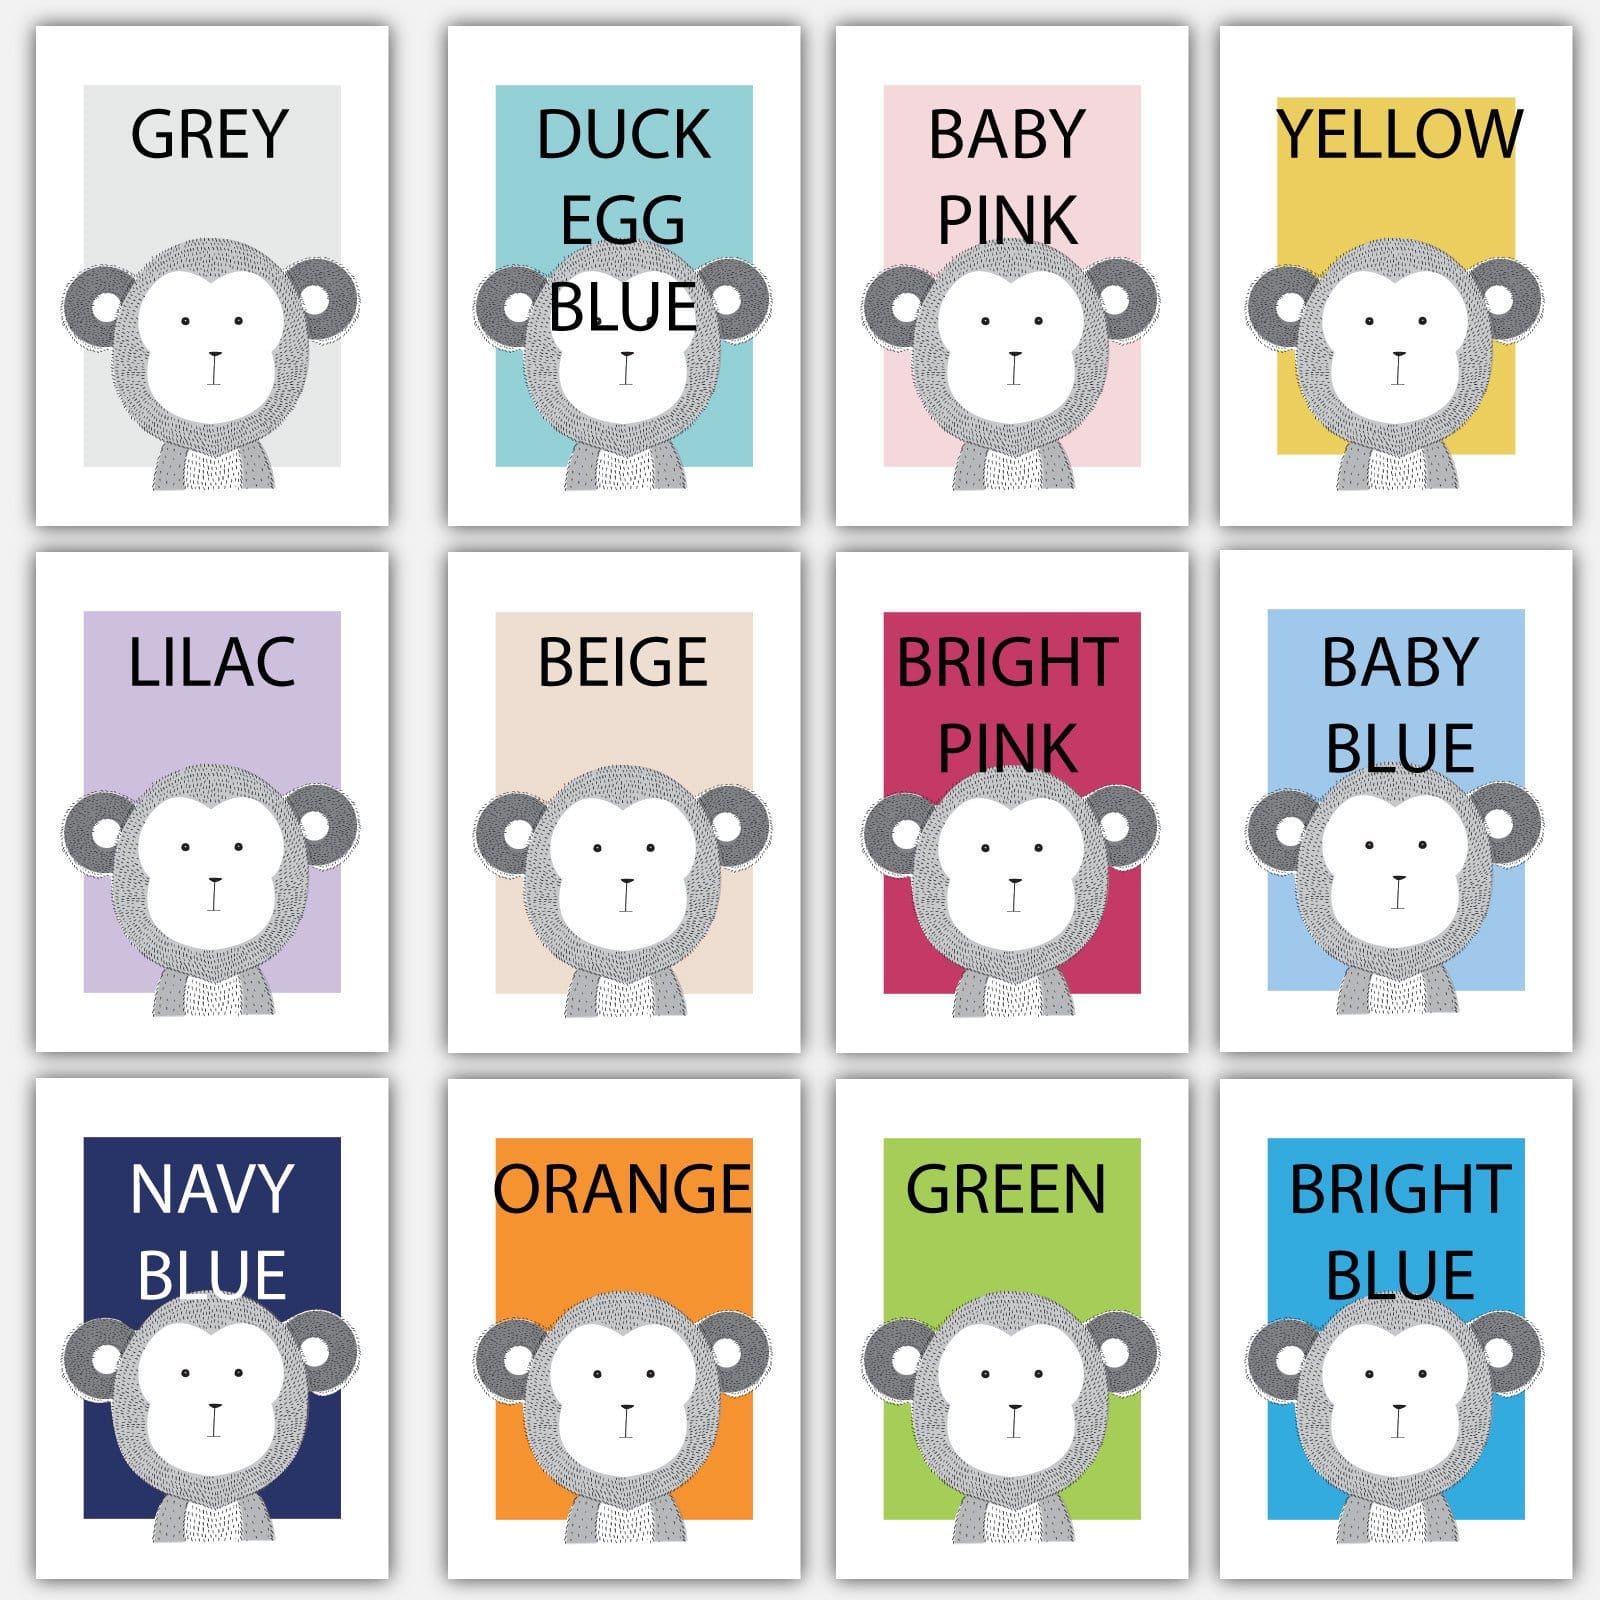 NURSERY Set CHOOSE any 3 Colours and Animals Create your own UNIQUE Gallery Wall Art Prints Original Scandinavian Style Posters Artwork